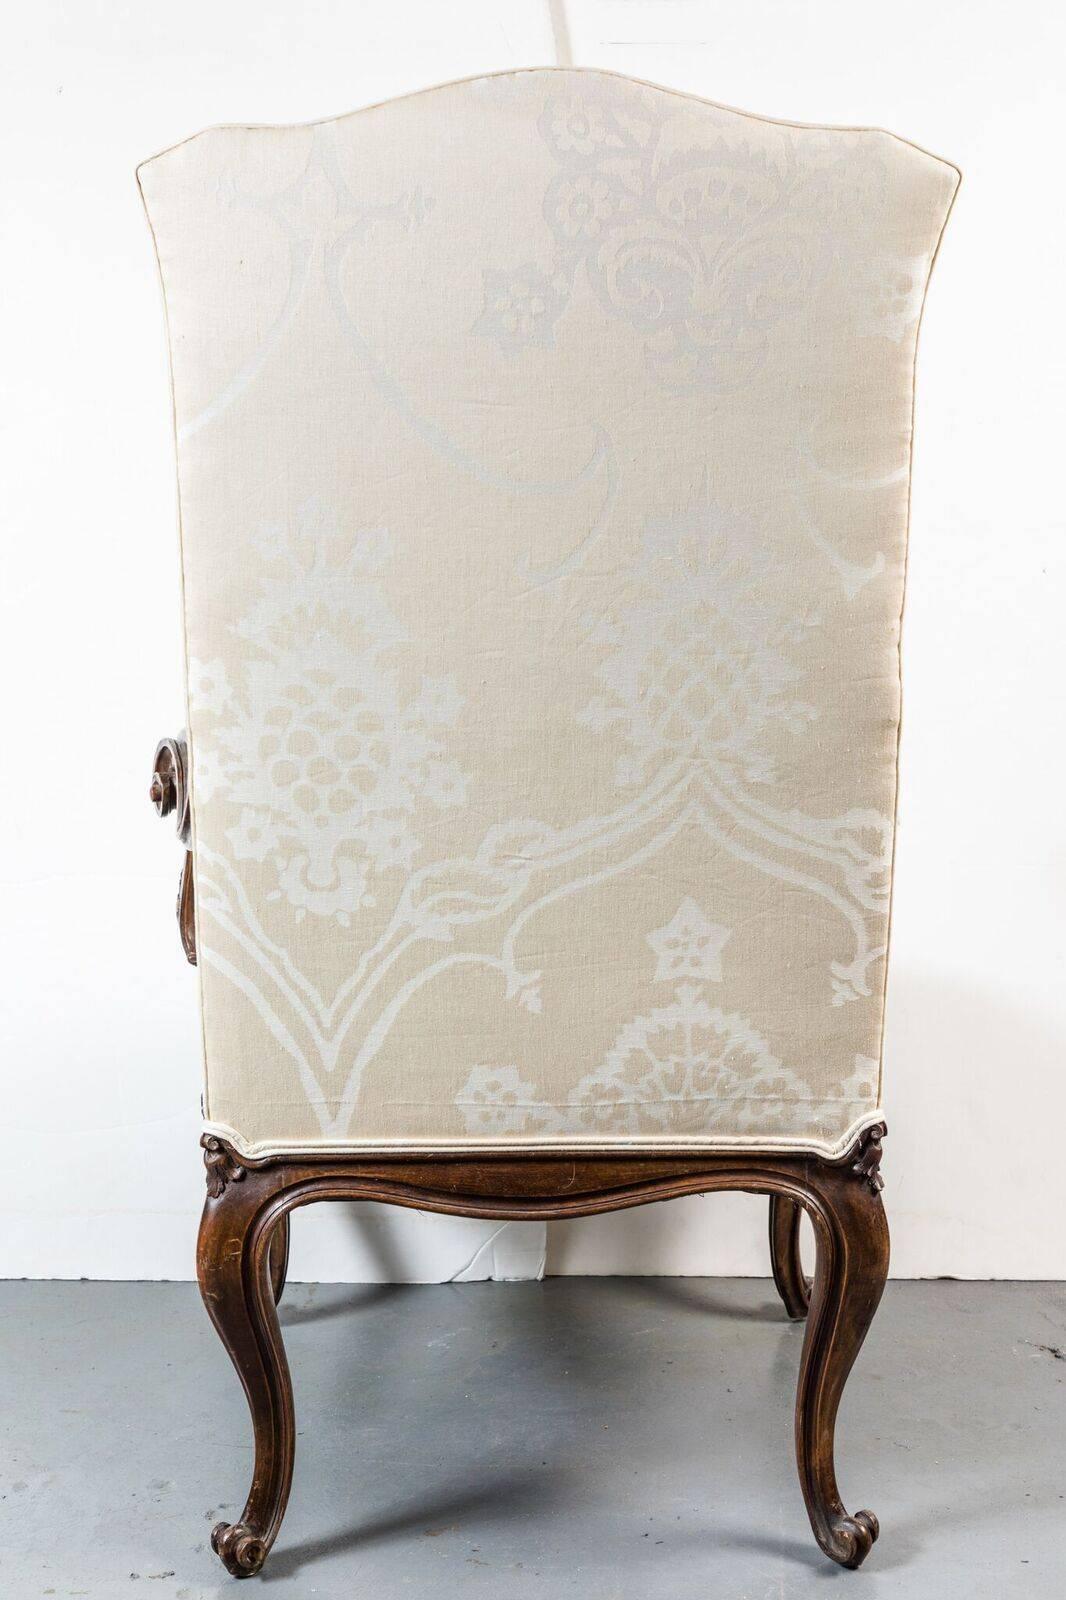 Grand, 19th Century Hall Chairs In Excellent Condition For Sale In Newport Beach, CA